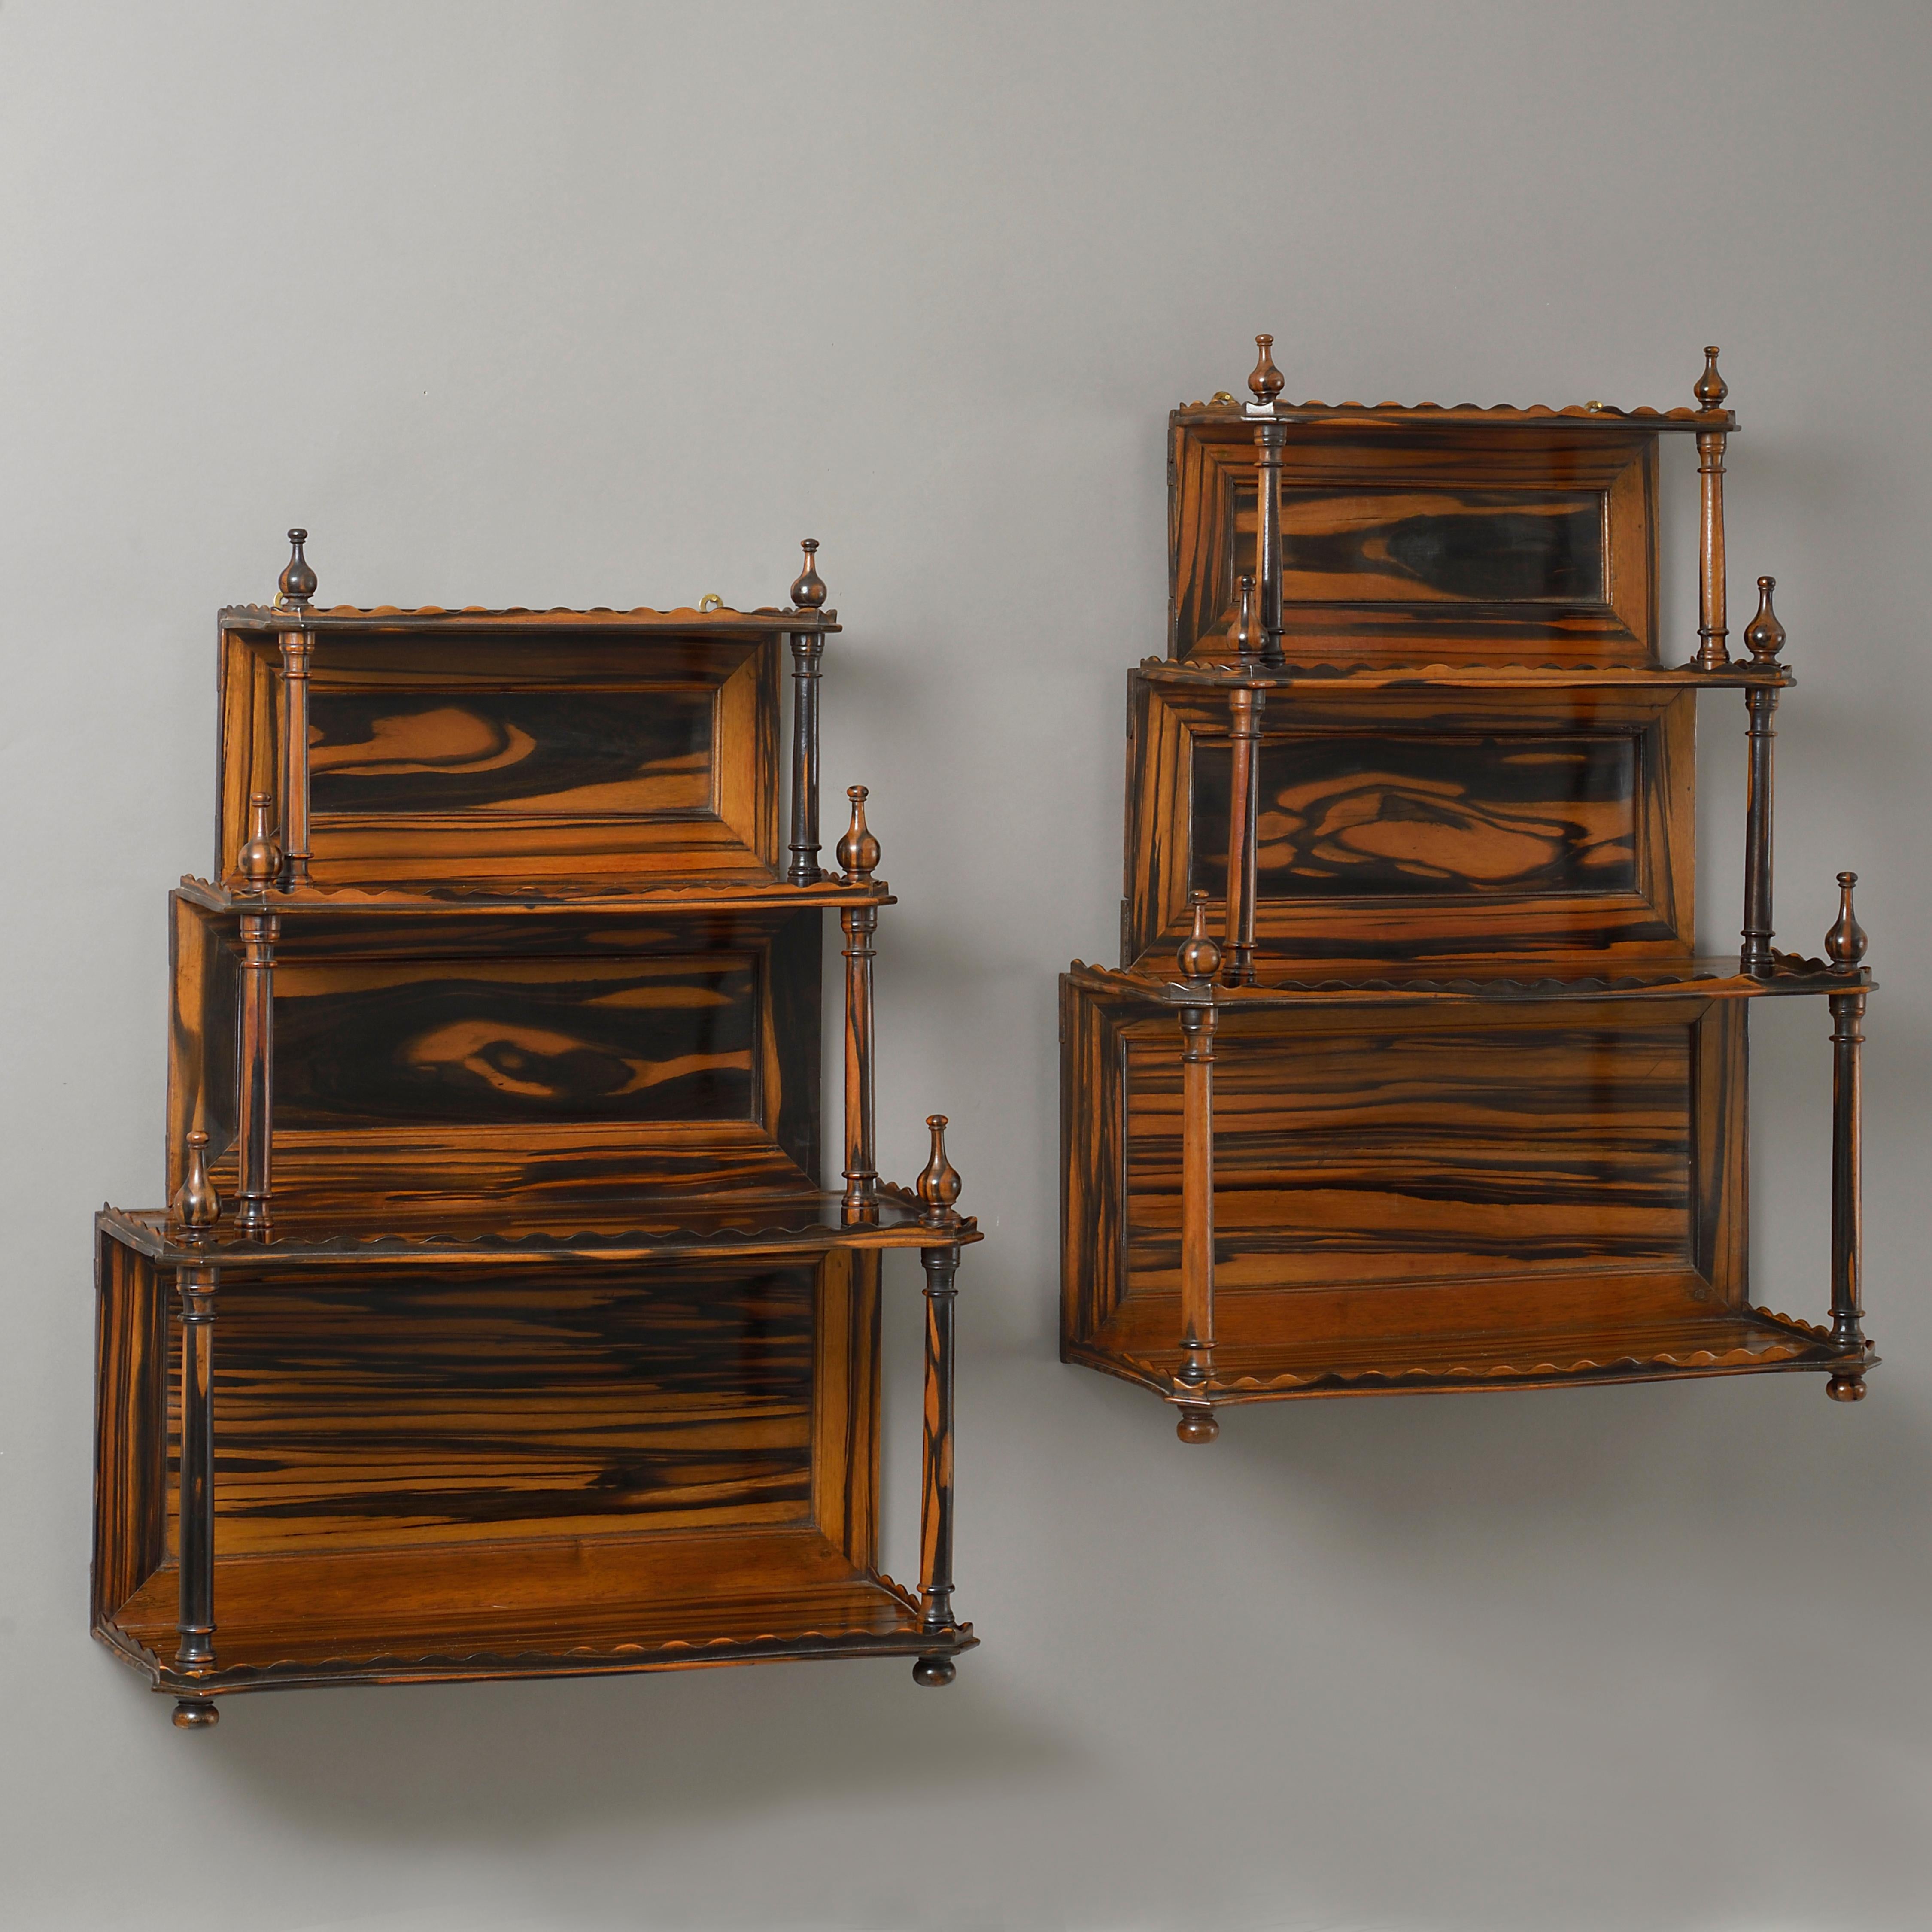 Anglo-Indian Pair of Mid-19th Century Calamander Wood Hanging Shelves For Sale